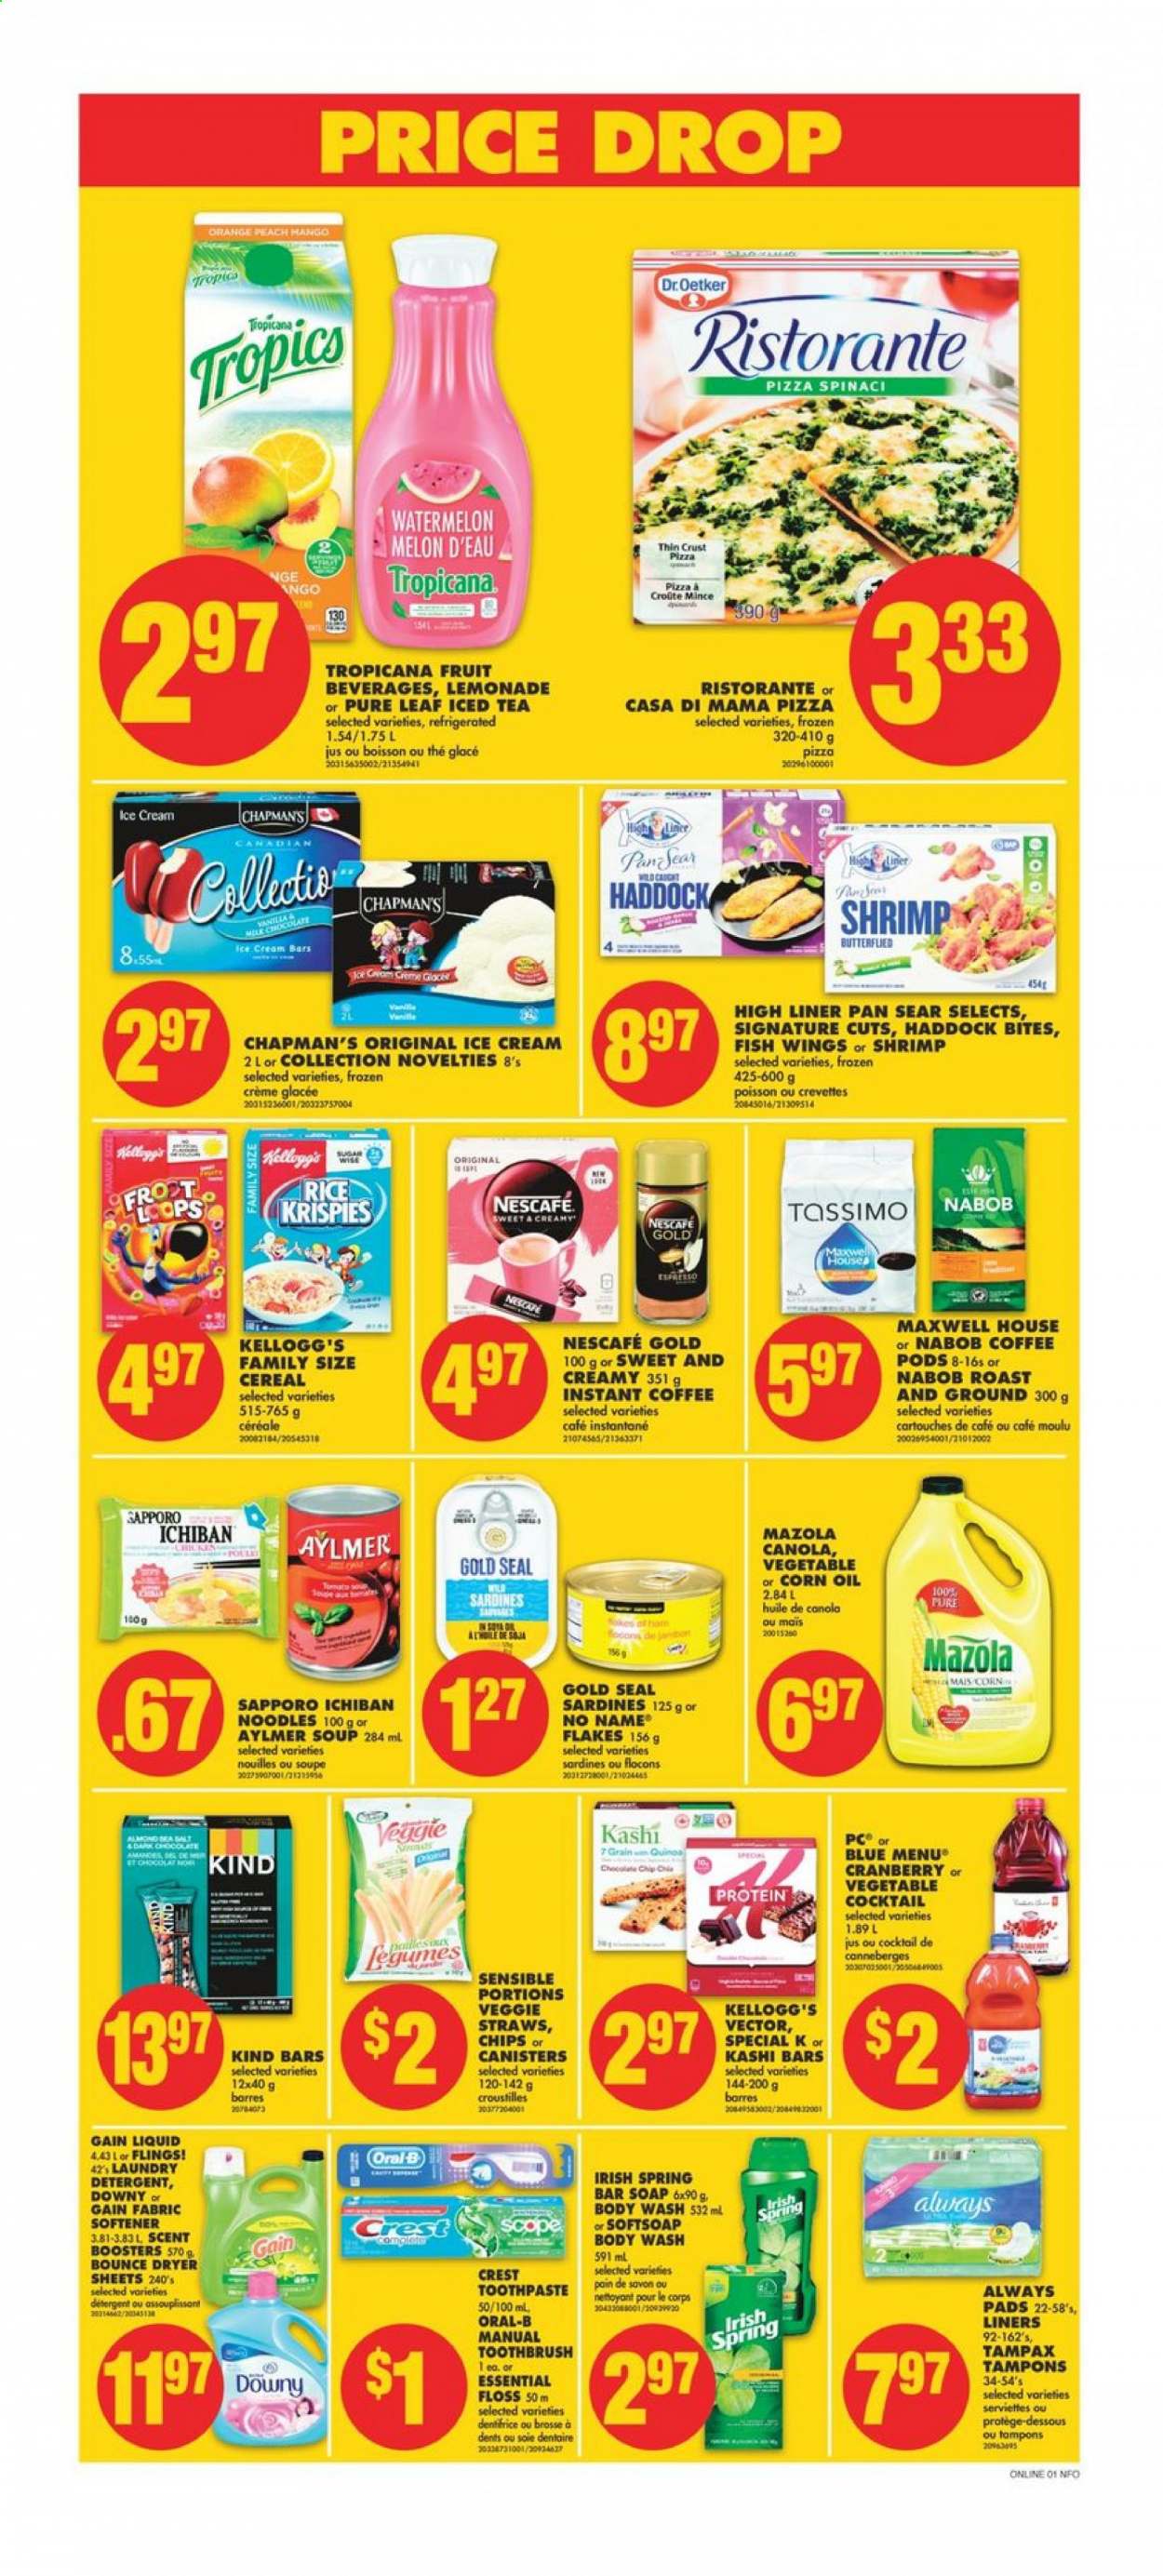 thumbnail - No Frills Flyer - July 15, 2021 - July 21, 2021 - Sales products - watermelon, melons, sardines, haddock, fish, shrimps, No Name, pizza, soup, noodles, ham, Dr. Oetker, ice cream, ice cream bars, milk chocolate, Kellogg's, Veggie Straws, sugar, cereals, Rice Krispies, corn oil, lemonade, ice tea, Maxwell House, Pure Leaf, coffee pods, instant coffee, L'Or, Gain, fabric softener, laundry detergent, Bounce, dryer sheets, scent booster, body wash, Softsoap, soap bar, soap, toothbrush, toothpaste, Crest, Always pads, tampons, pan, Tampax, Oral-B, Nescafé. Page 7.